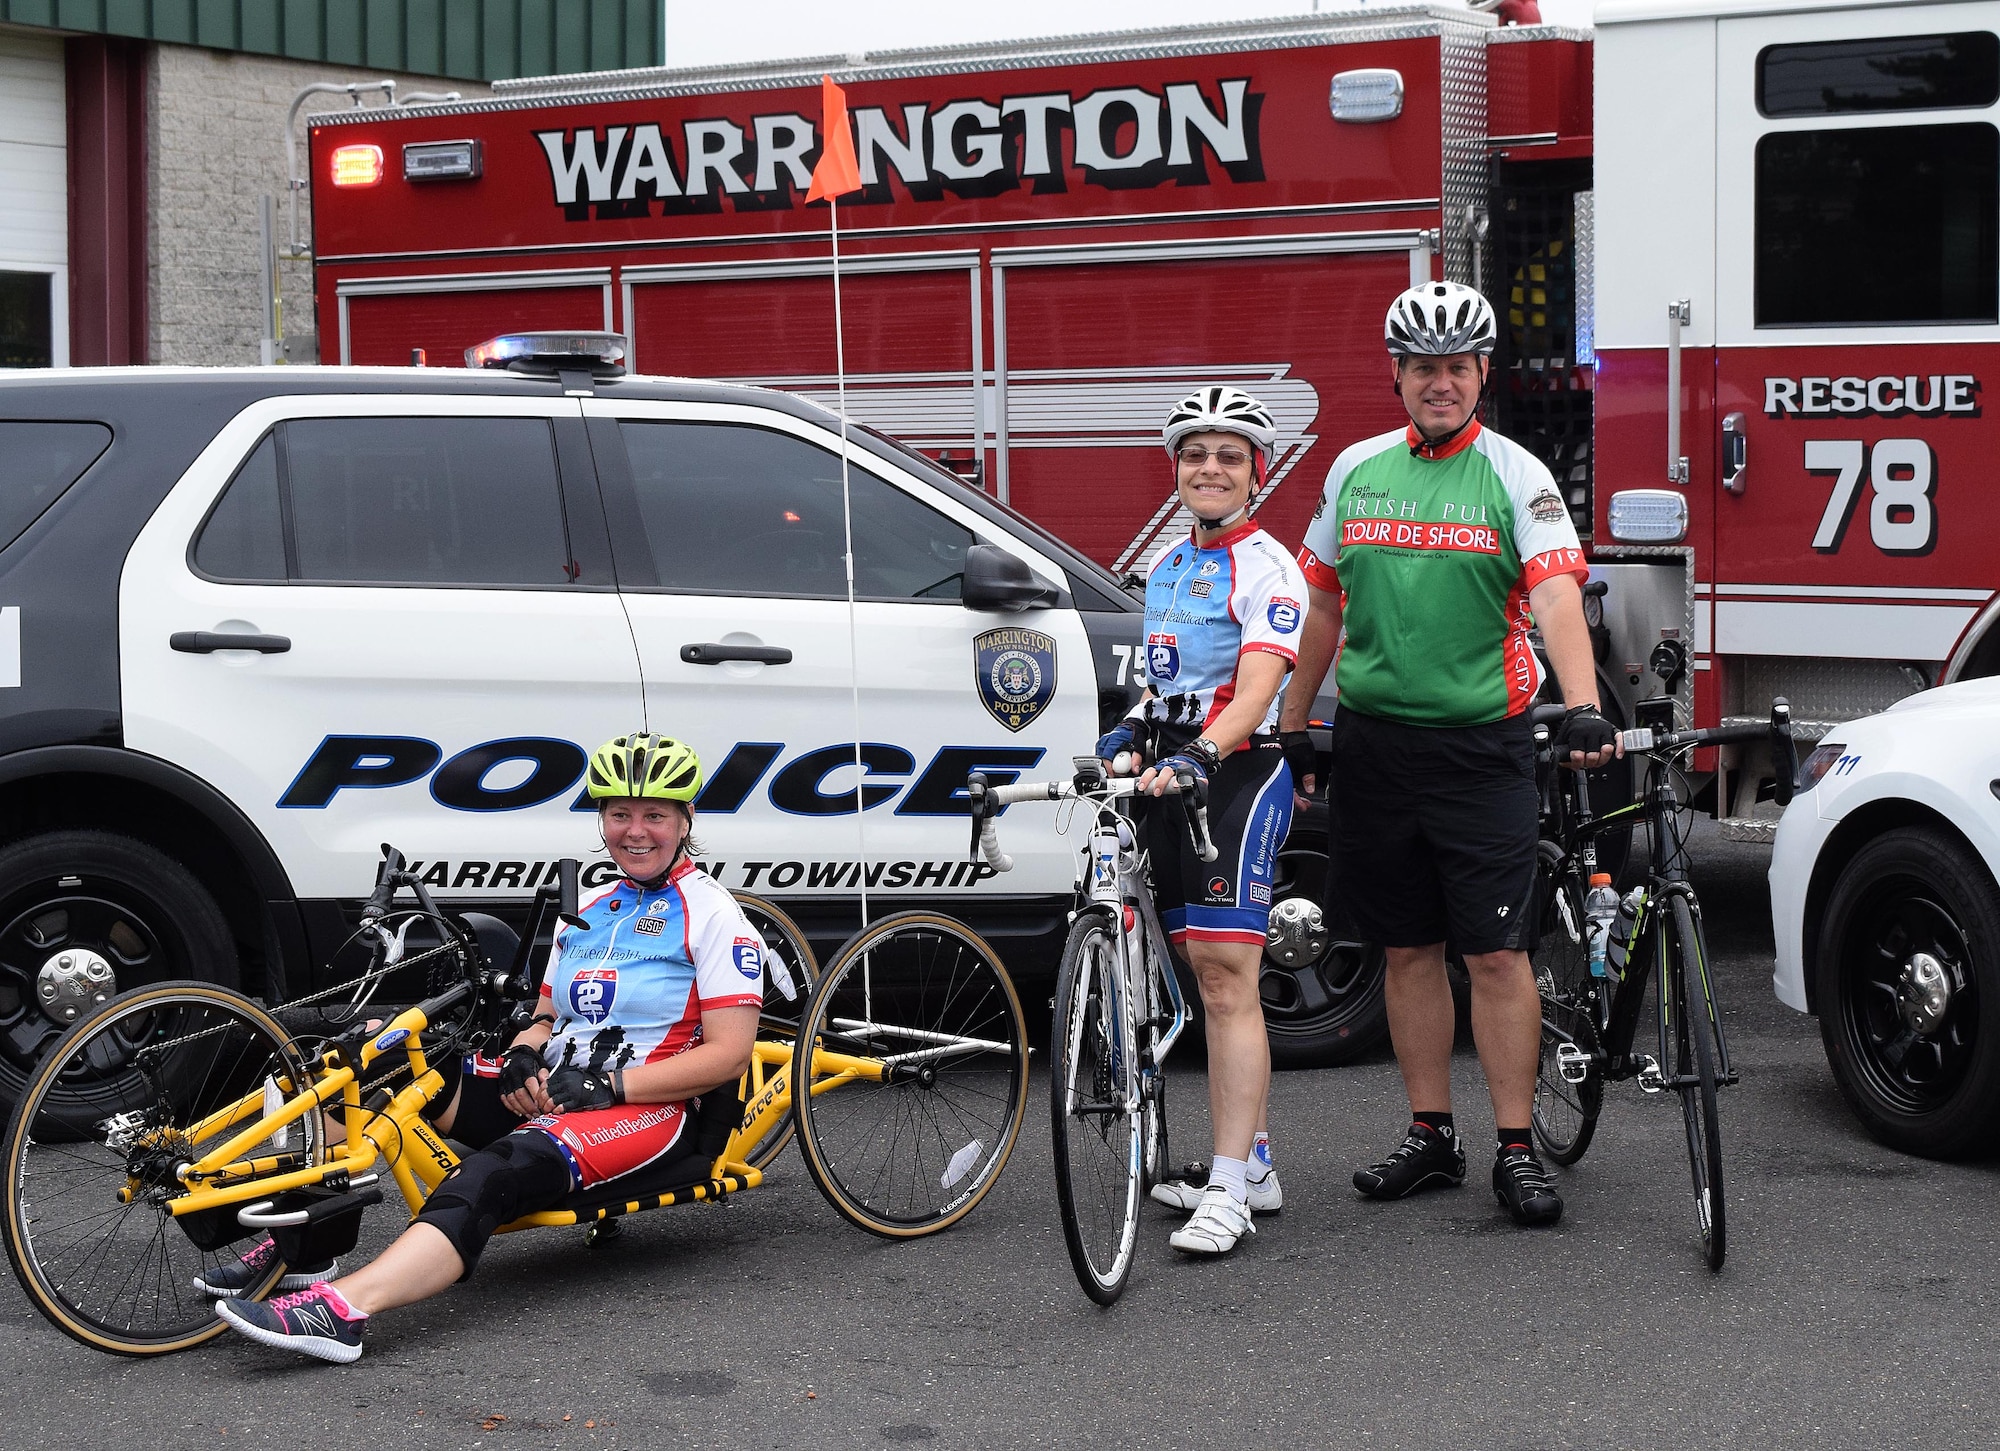 Members of the Horsham Air Guard Station team with local police chief for a 15 mile test run of cycling routes to prepare bicyclists for upcoming larger events. Stopping at the Warrington Township Fire Company Number 1 along Easton Road, Theresa Arentzen, program support technician with the Employers Support of the Guard and Reserve, left, Lt. Col. Claudia Malone, 112th Cyberspace Operations Squadron commander and Horsham Chief of Police, Bill Daly are greeted by first responders from Warrington and Horsham, Pennsylvania on July 14, 2016.  (U.S. Air National Guard photo by Master Sgt. Christopher Botzum)